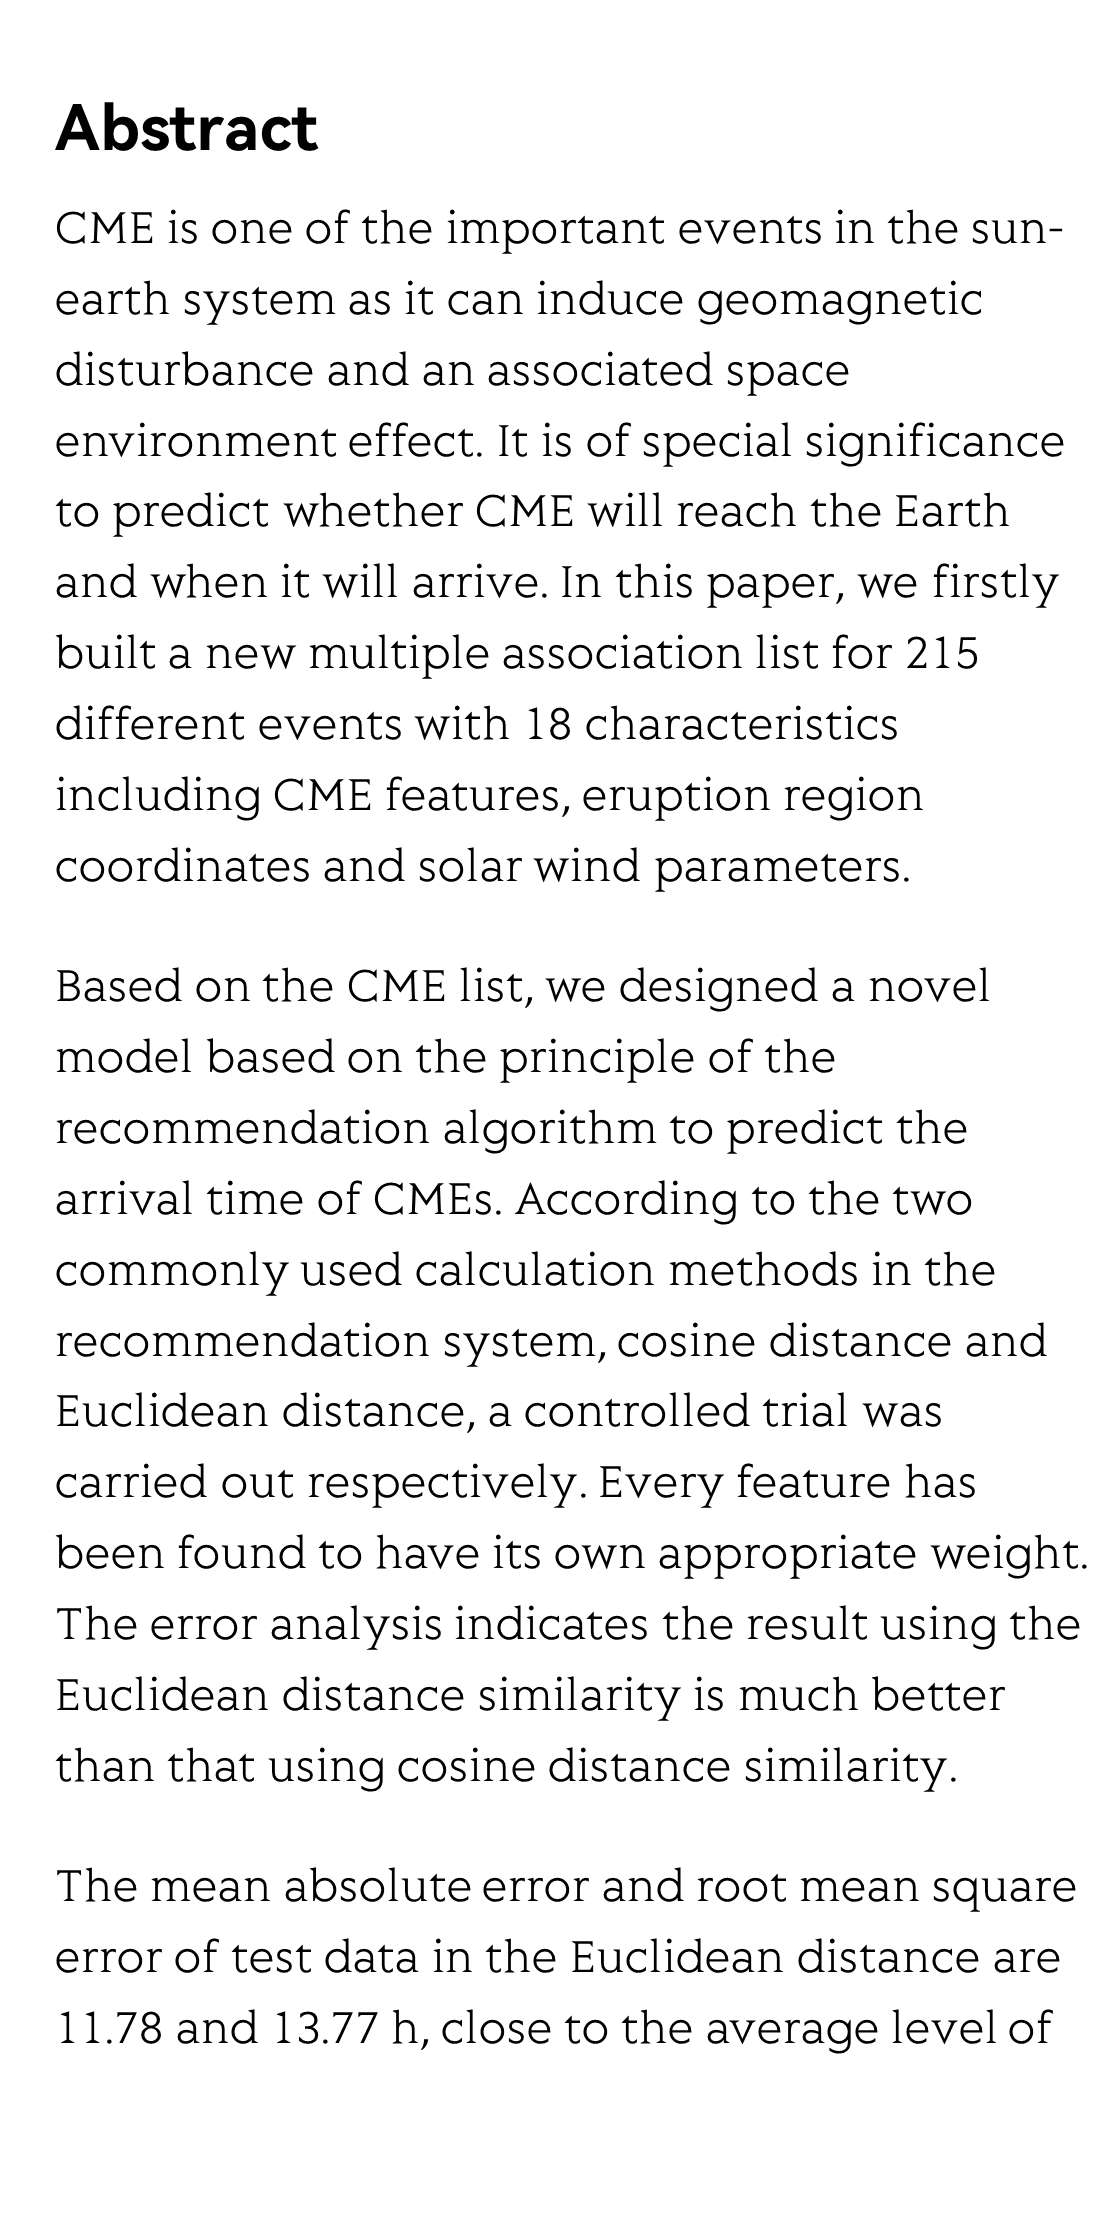 Predicting the CME arrival time based on the recommendation algorithm_2